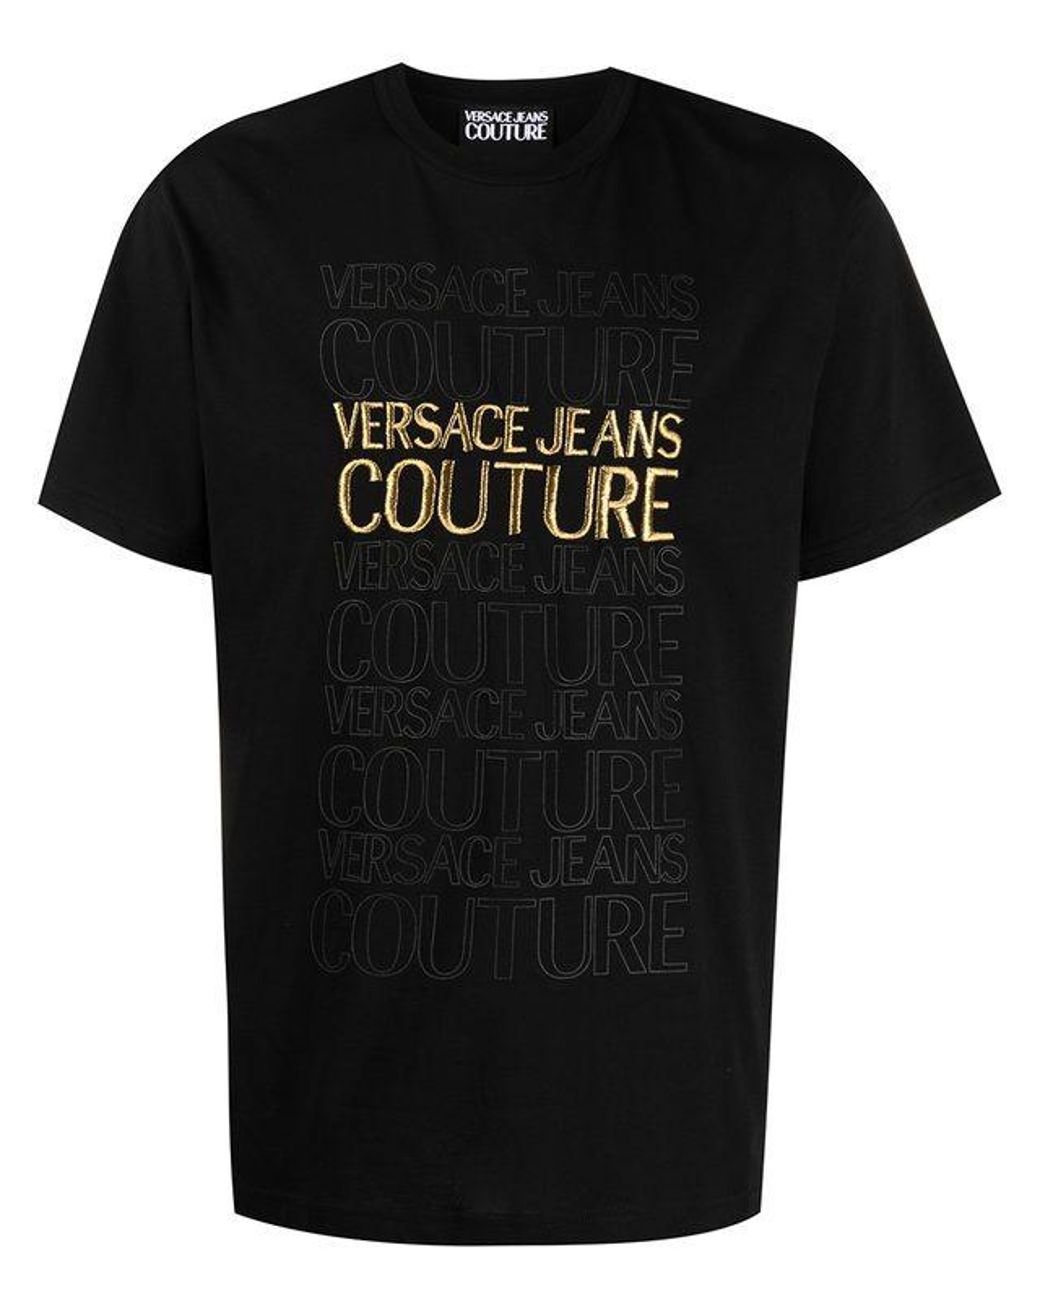 Versace Jeans Couture Embroidered Cotton T-shirt in Black for Men - Lyst